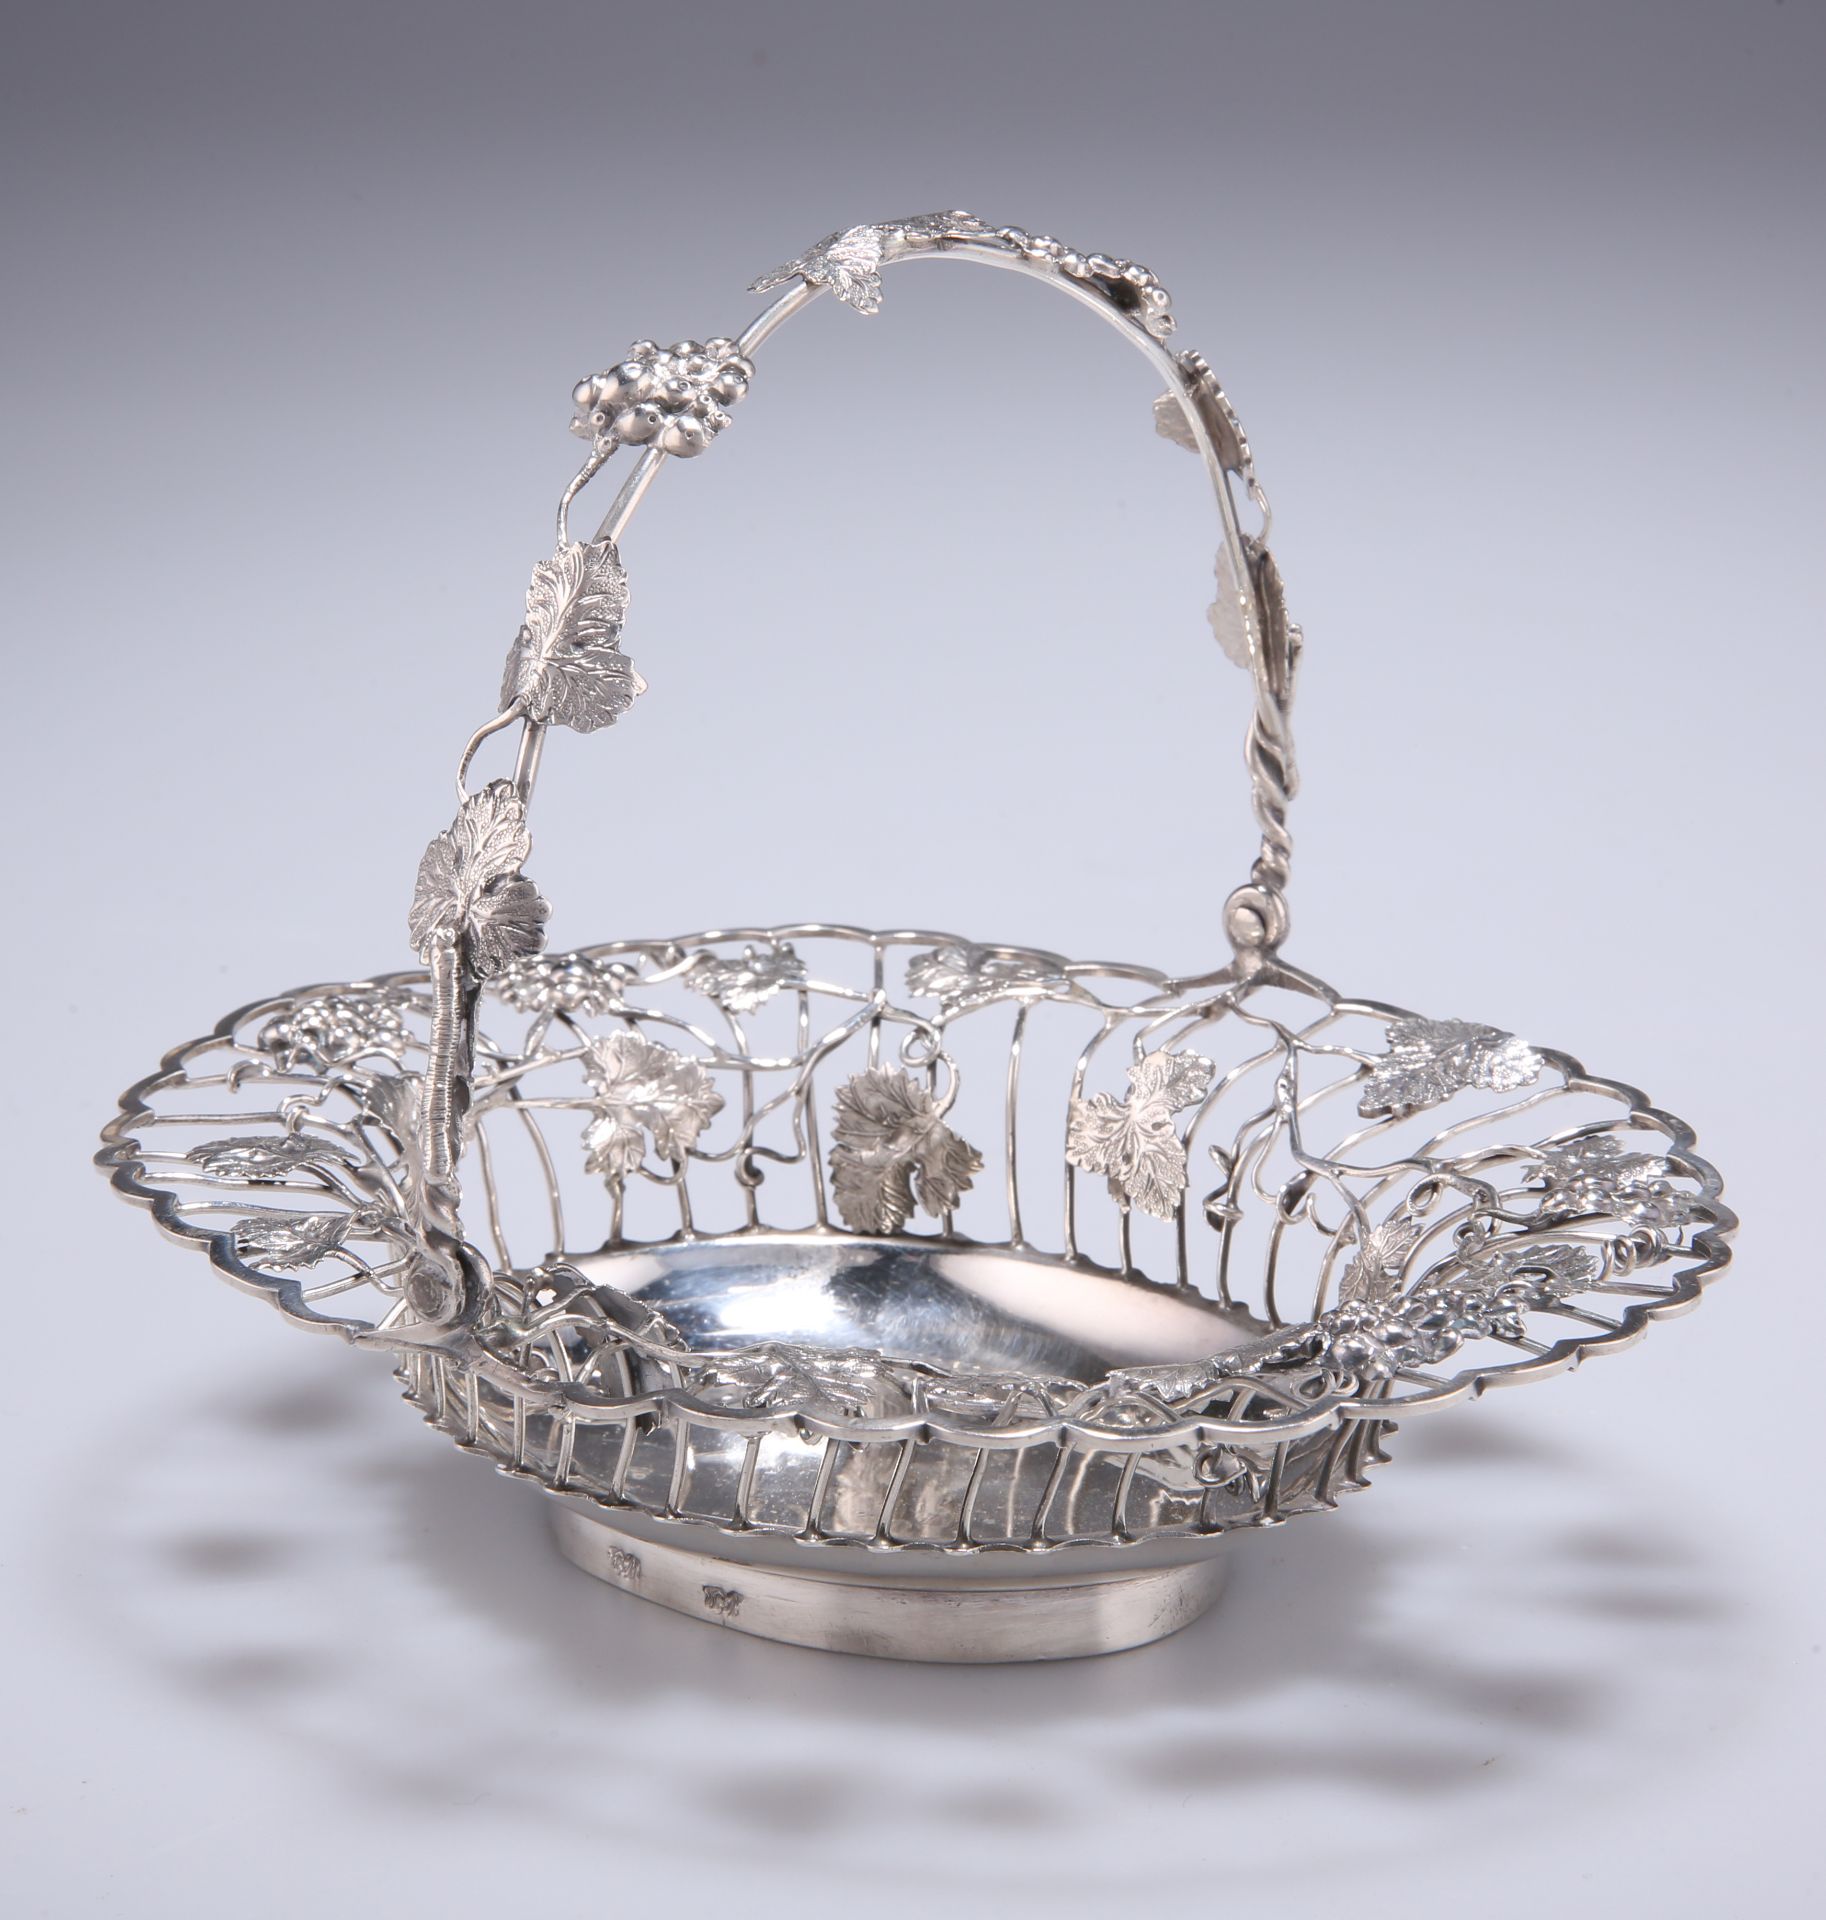 A GEORGIAN SILVER SWEETMEAT BASKET, marks rubbed, the open basket with trailing vine leaves and